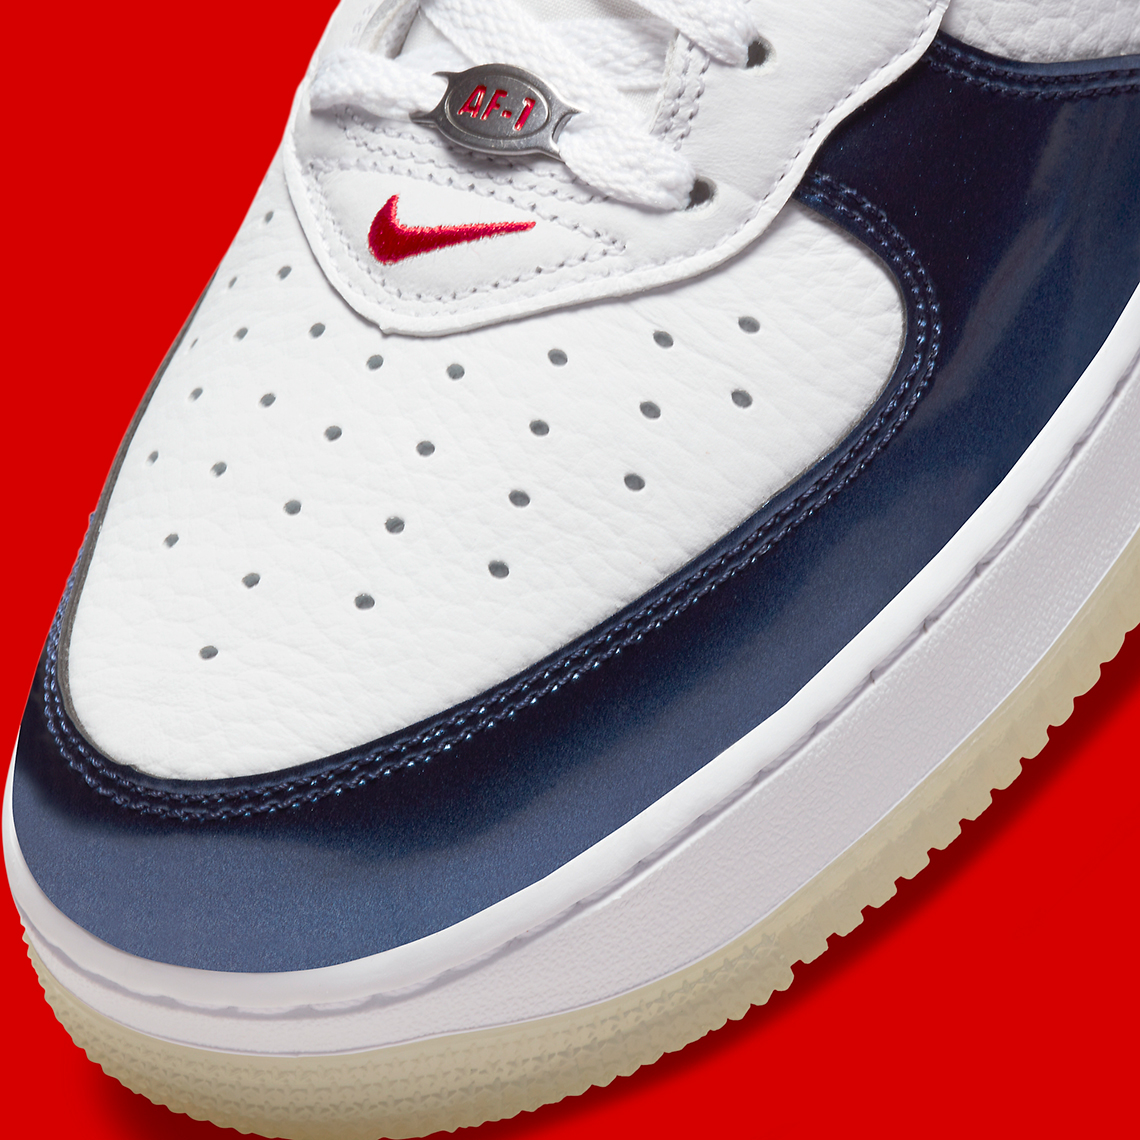 Nike blue low lifestyle exclusive denim nike by you levis nike air force 1 air no vat denim Qs White University Red Midnight Navy Dh5623 101 7